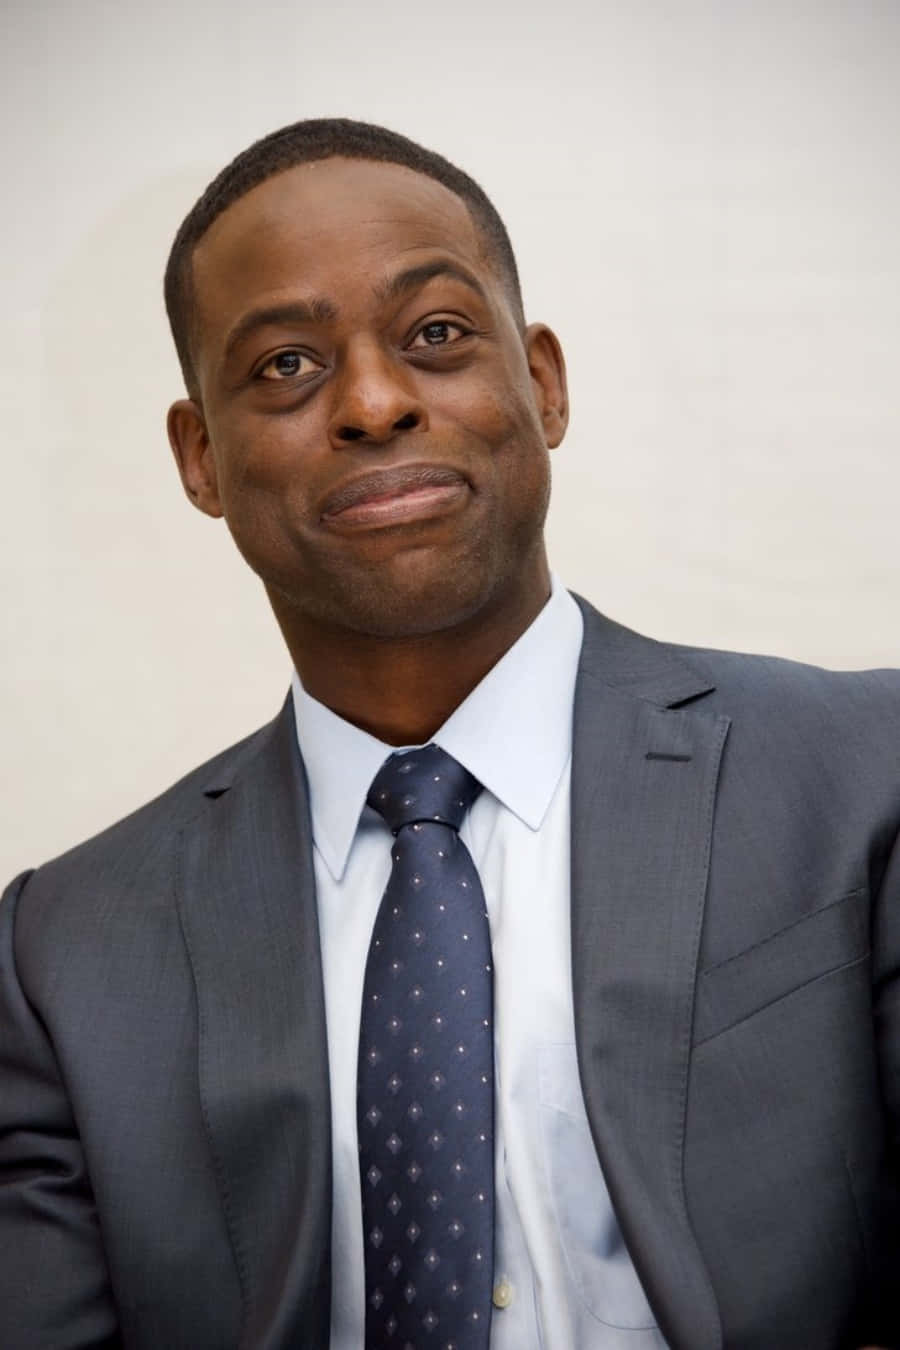 Sterling K Brown - An Award-Winning Actor And Entertainer" Wallpaper